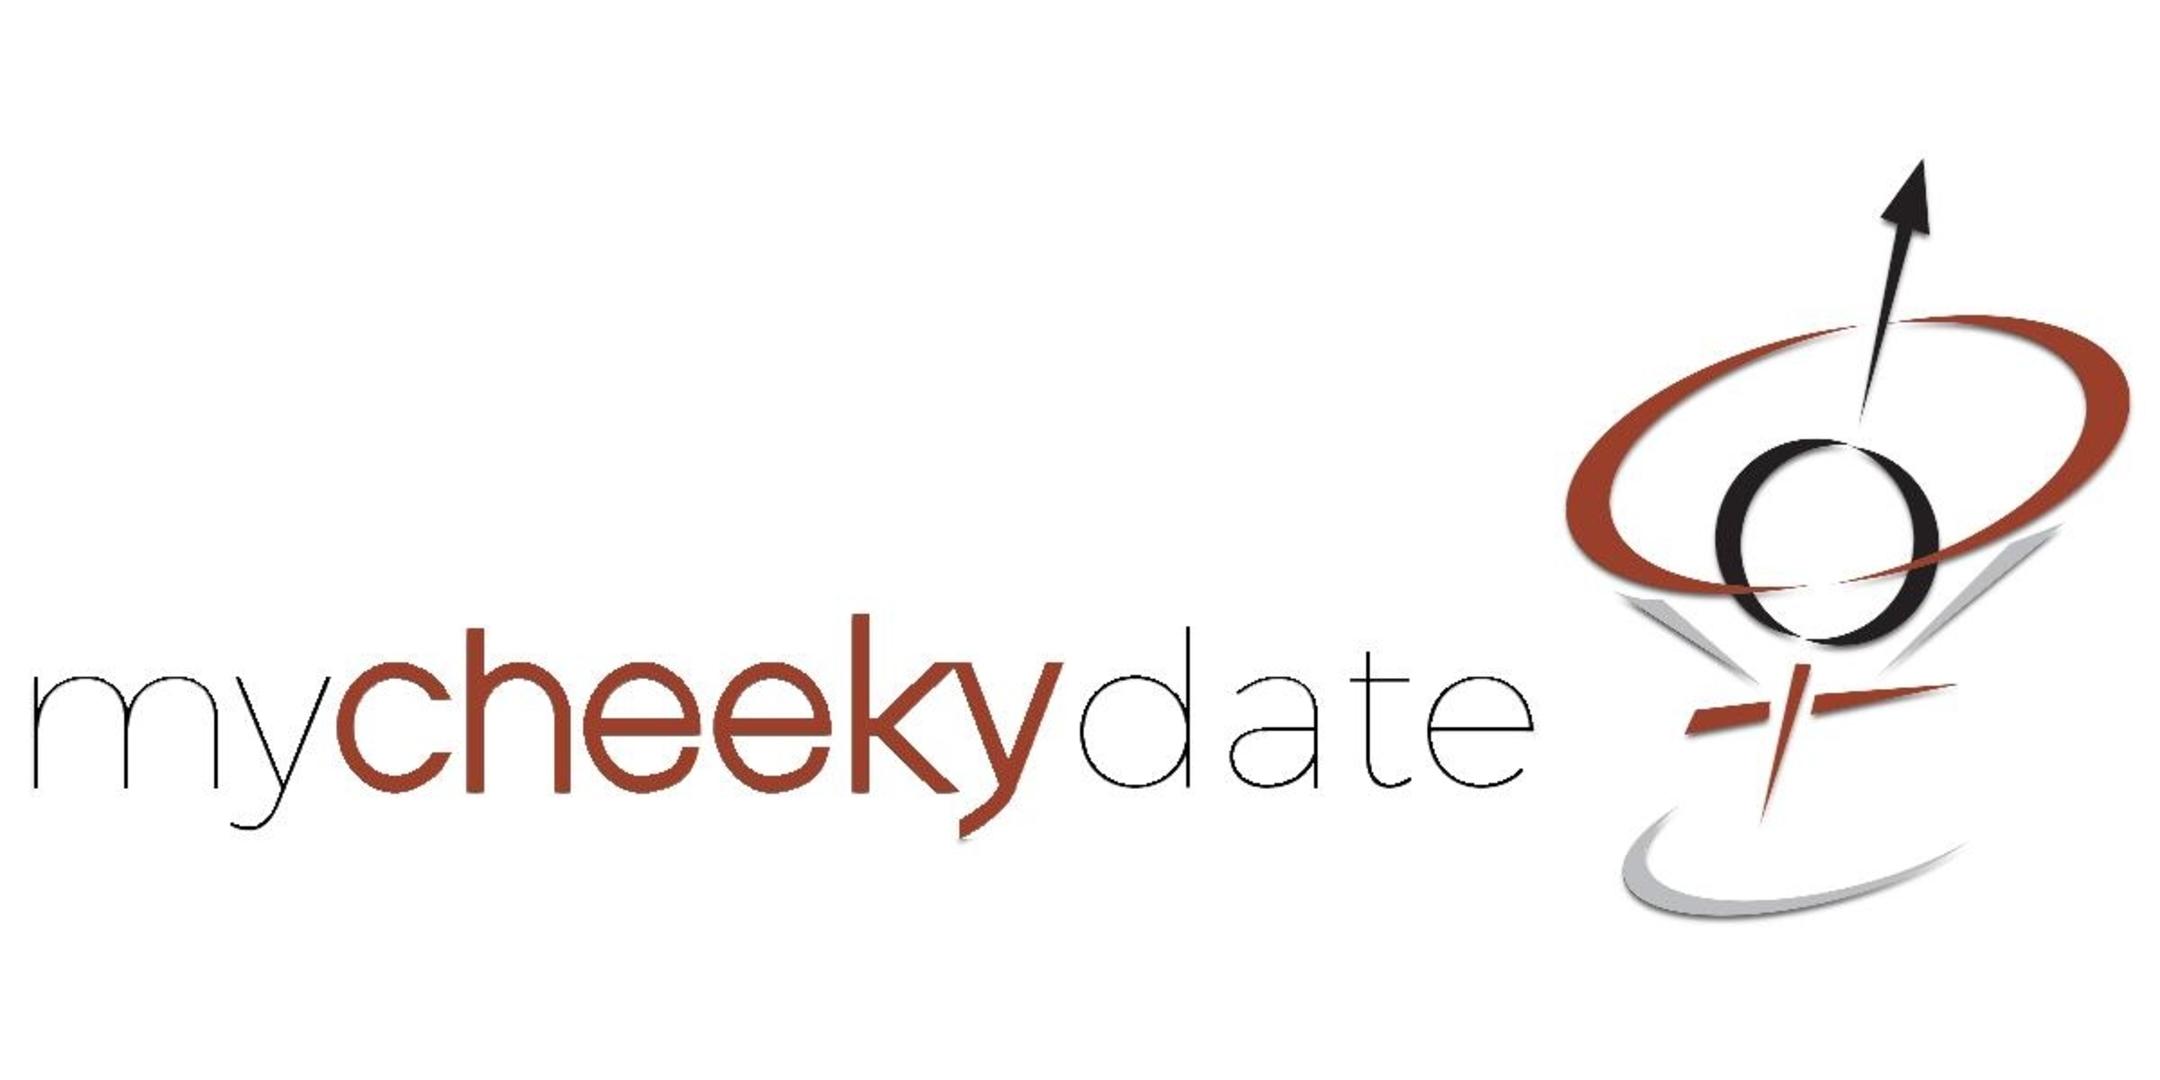 Singles event | Speed Dating in LA (Ages 25-39) | MyCheekyDate